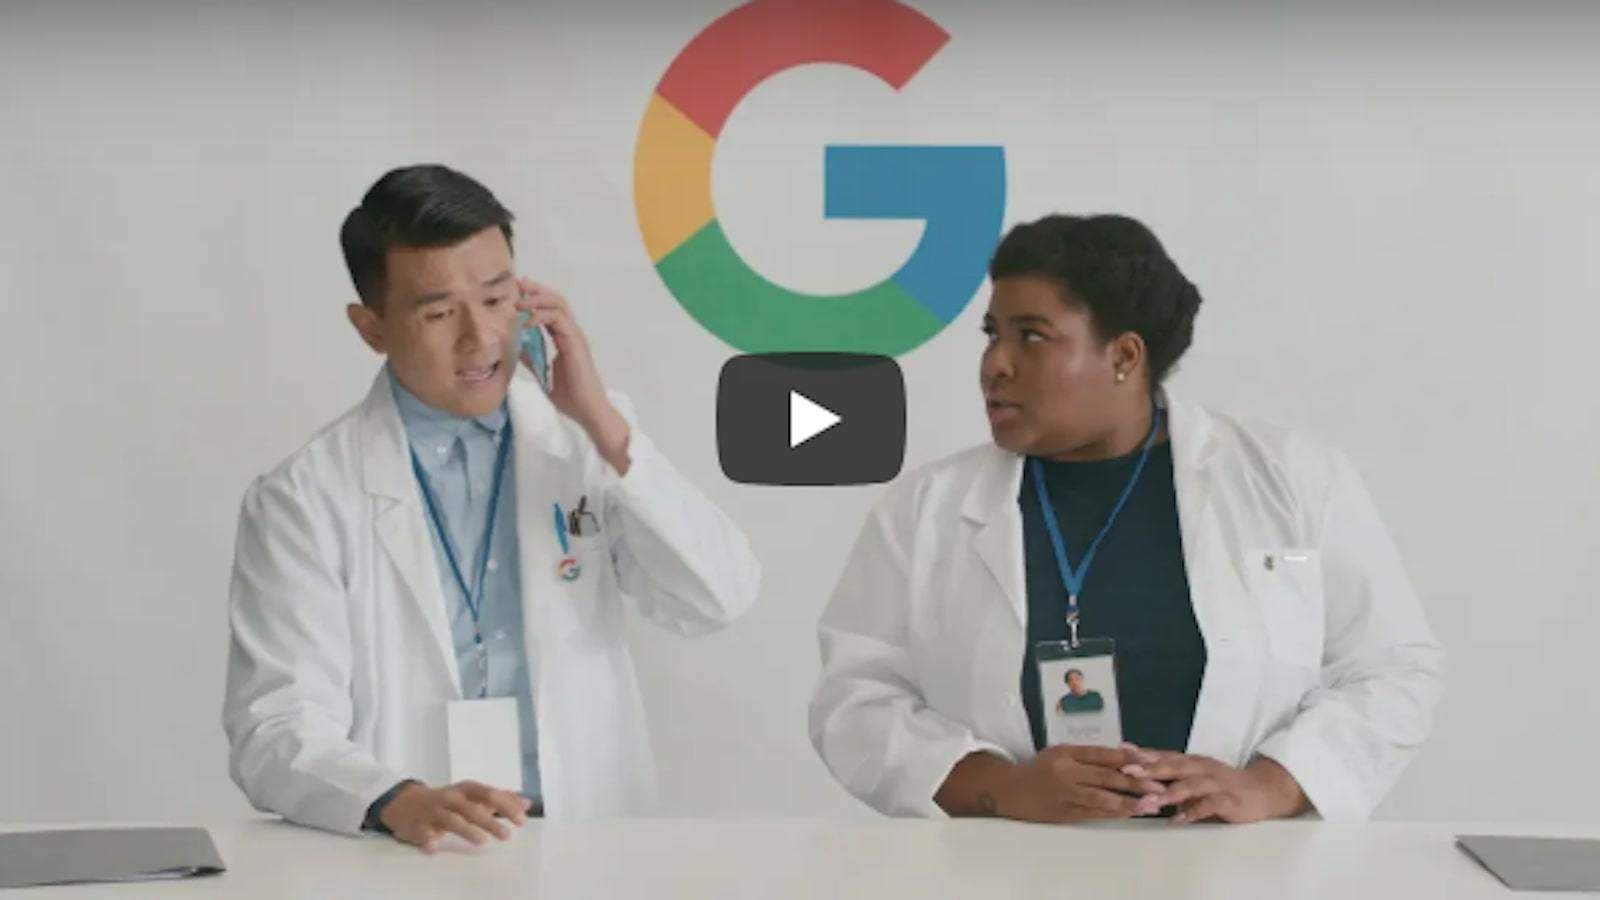 Google takes Jab At Cryptocurrency in New Pixel 3 Commercial